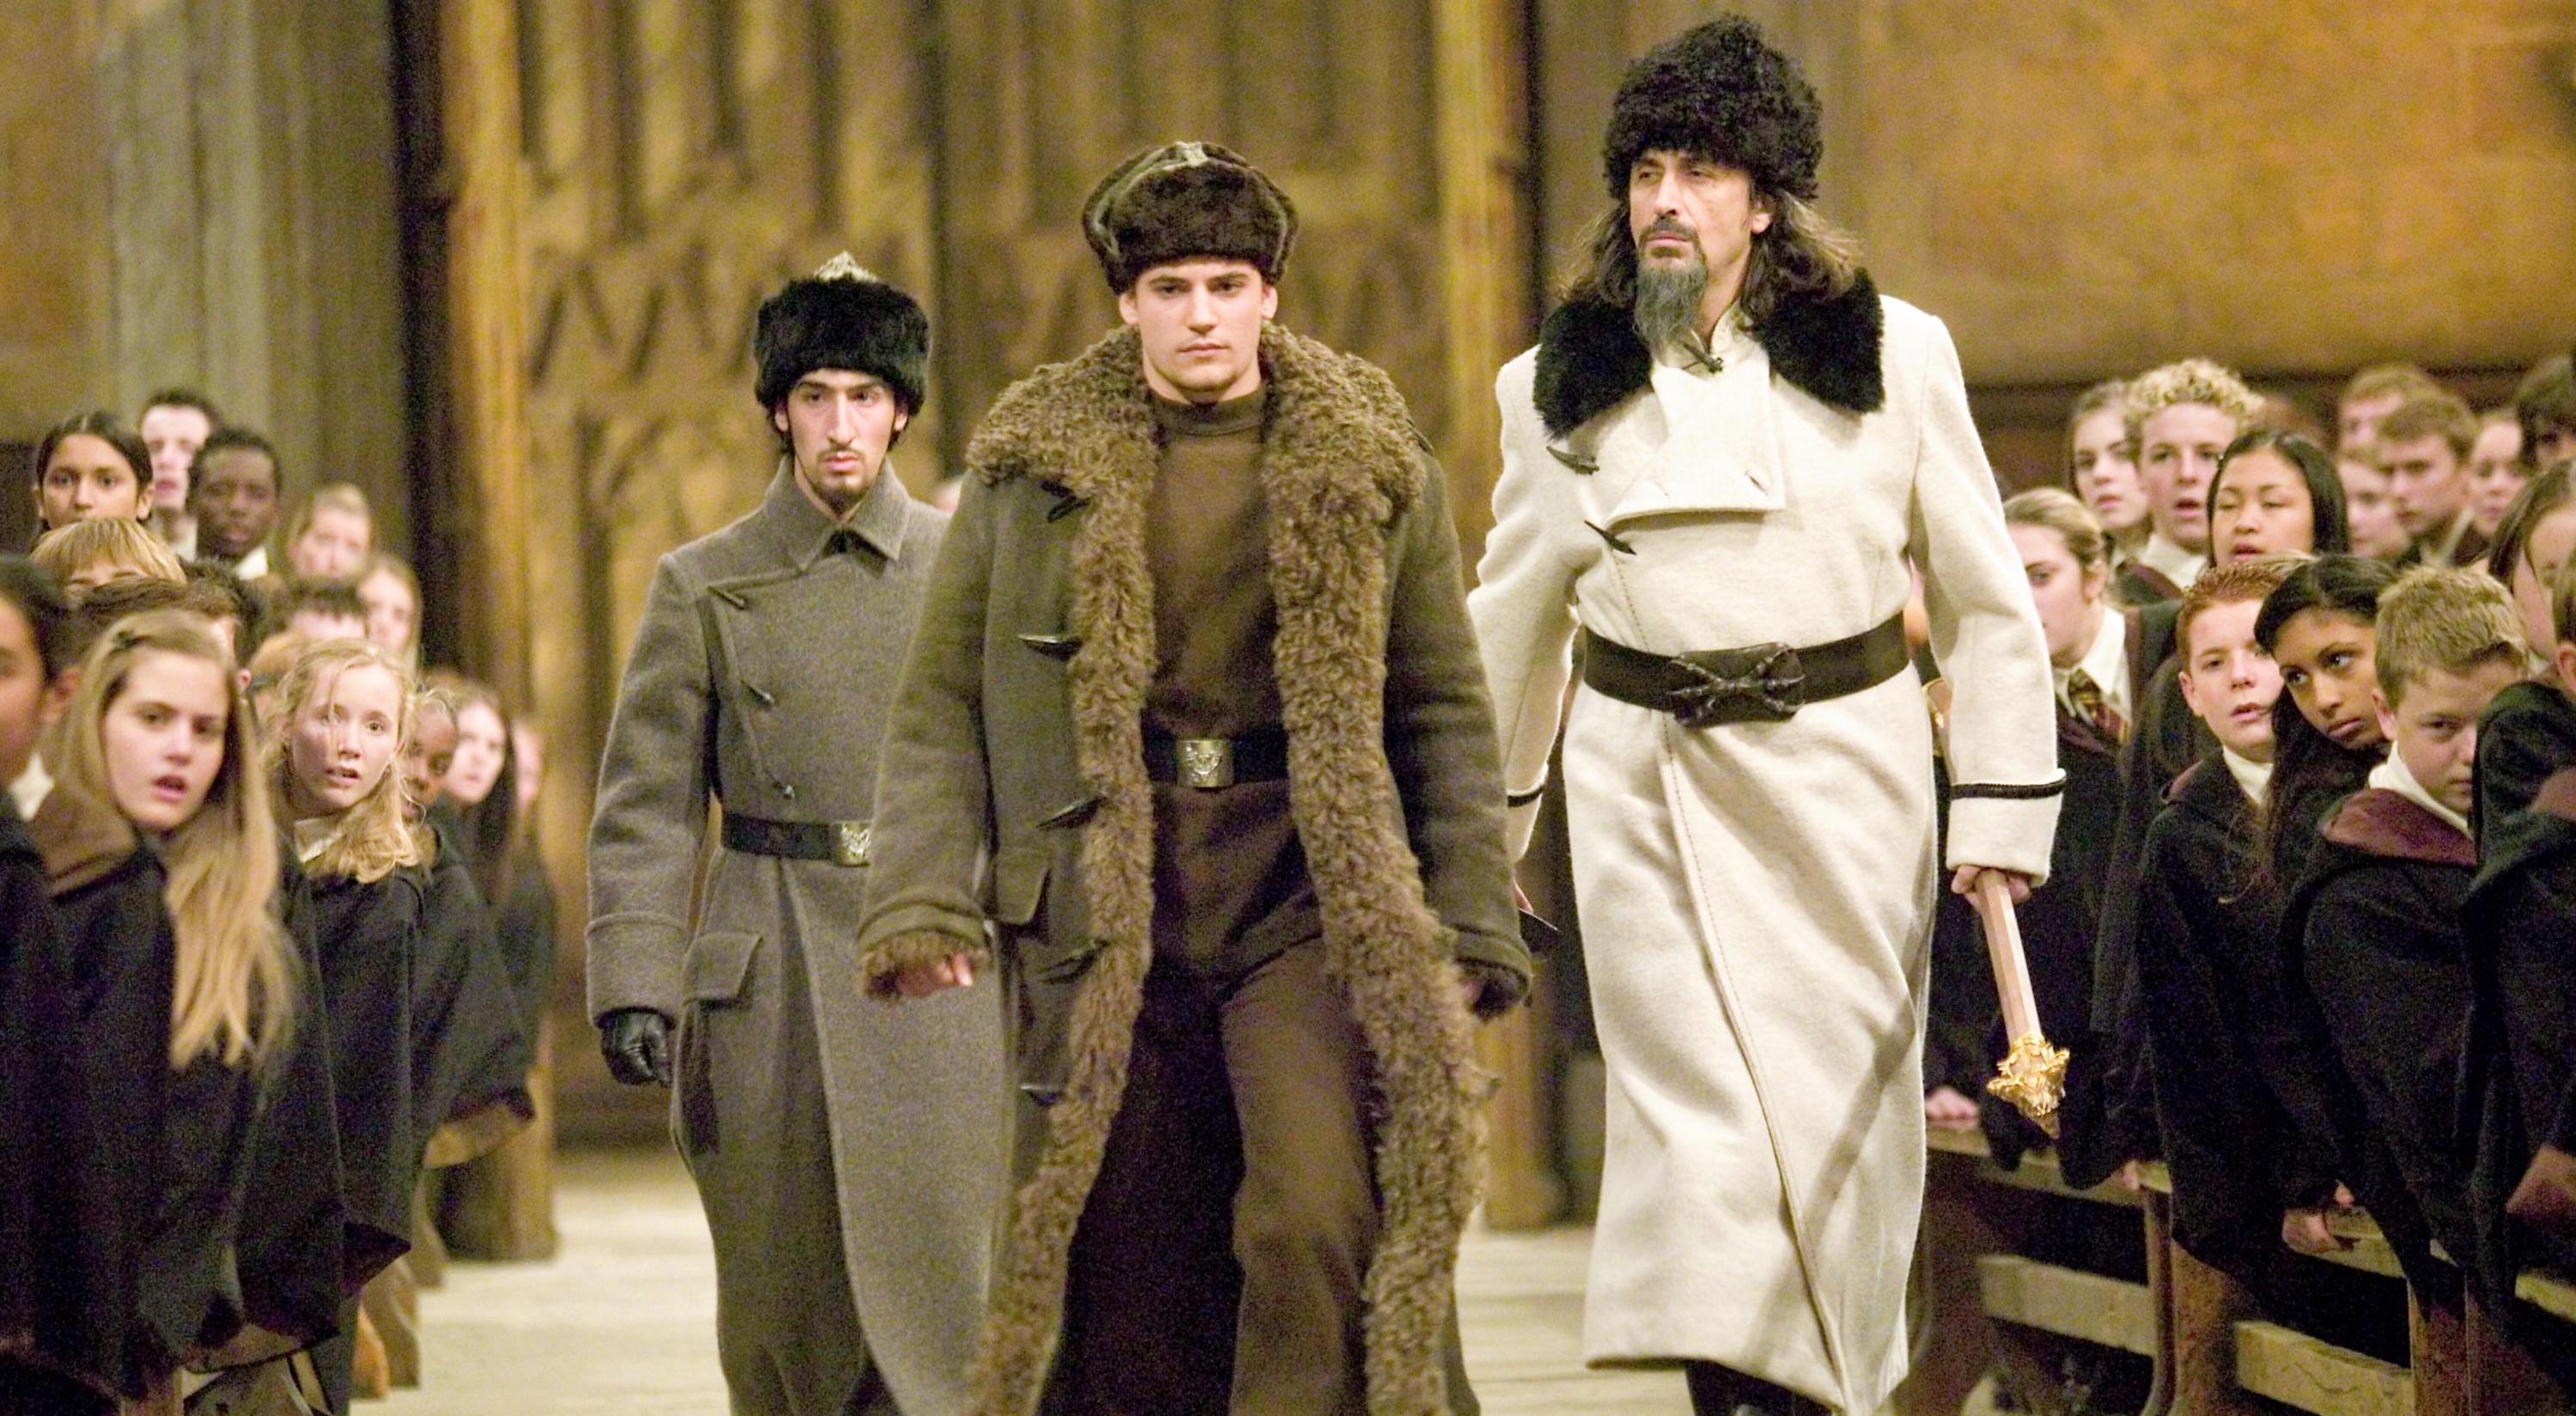 wizards from eastern Europe go to Durmstrang.jpg